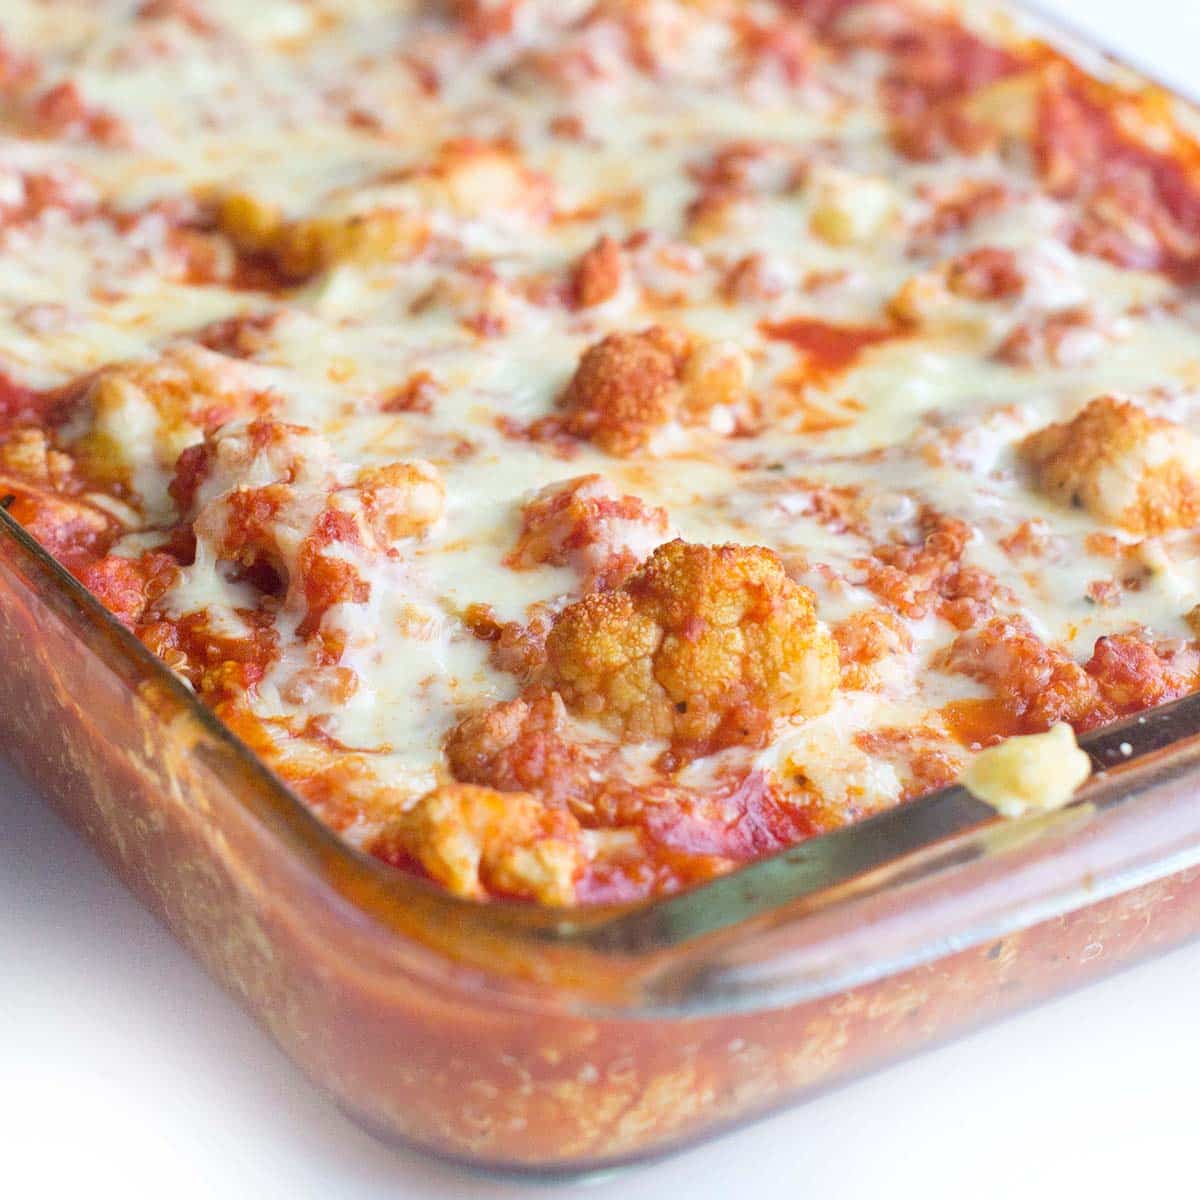 A 13x9 inch glass casserole dish filled with a mixture of cooked quinoa, cauliflower, and tomato sauce, topped with cheese. The background is all white.